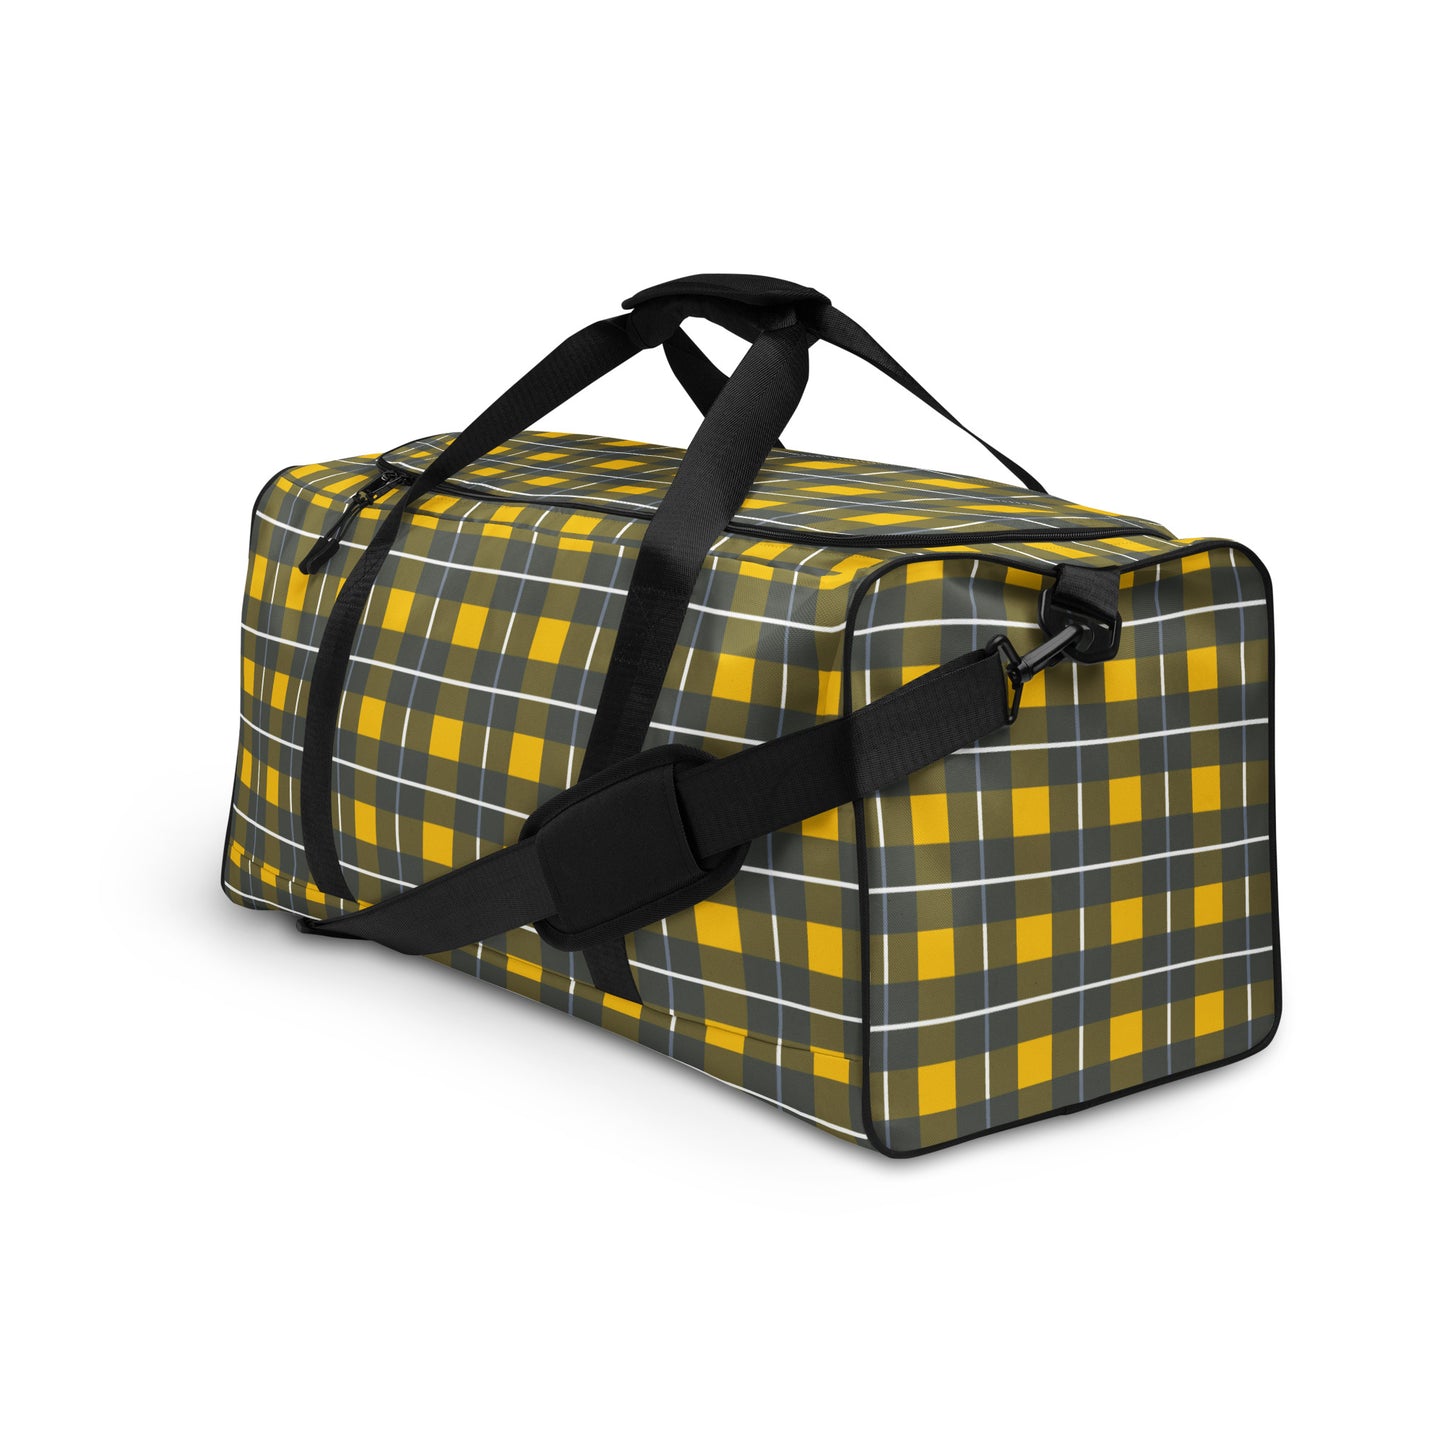 Yellow Tartan - Inspired By Harry Styles - Sustainably Made  Duffle bag